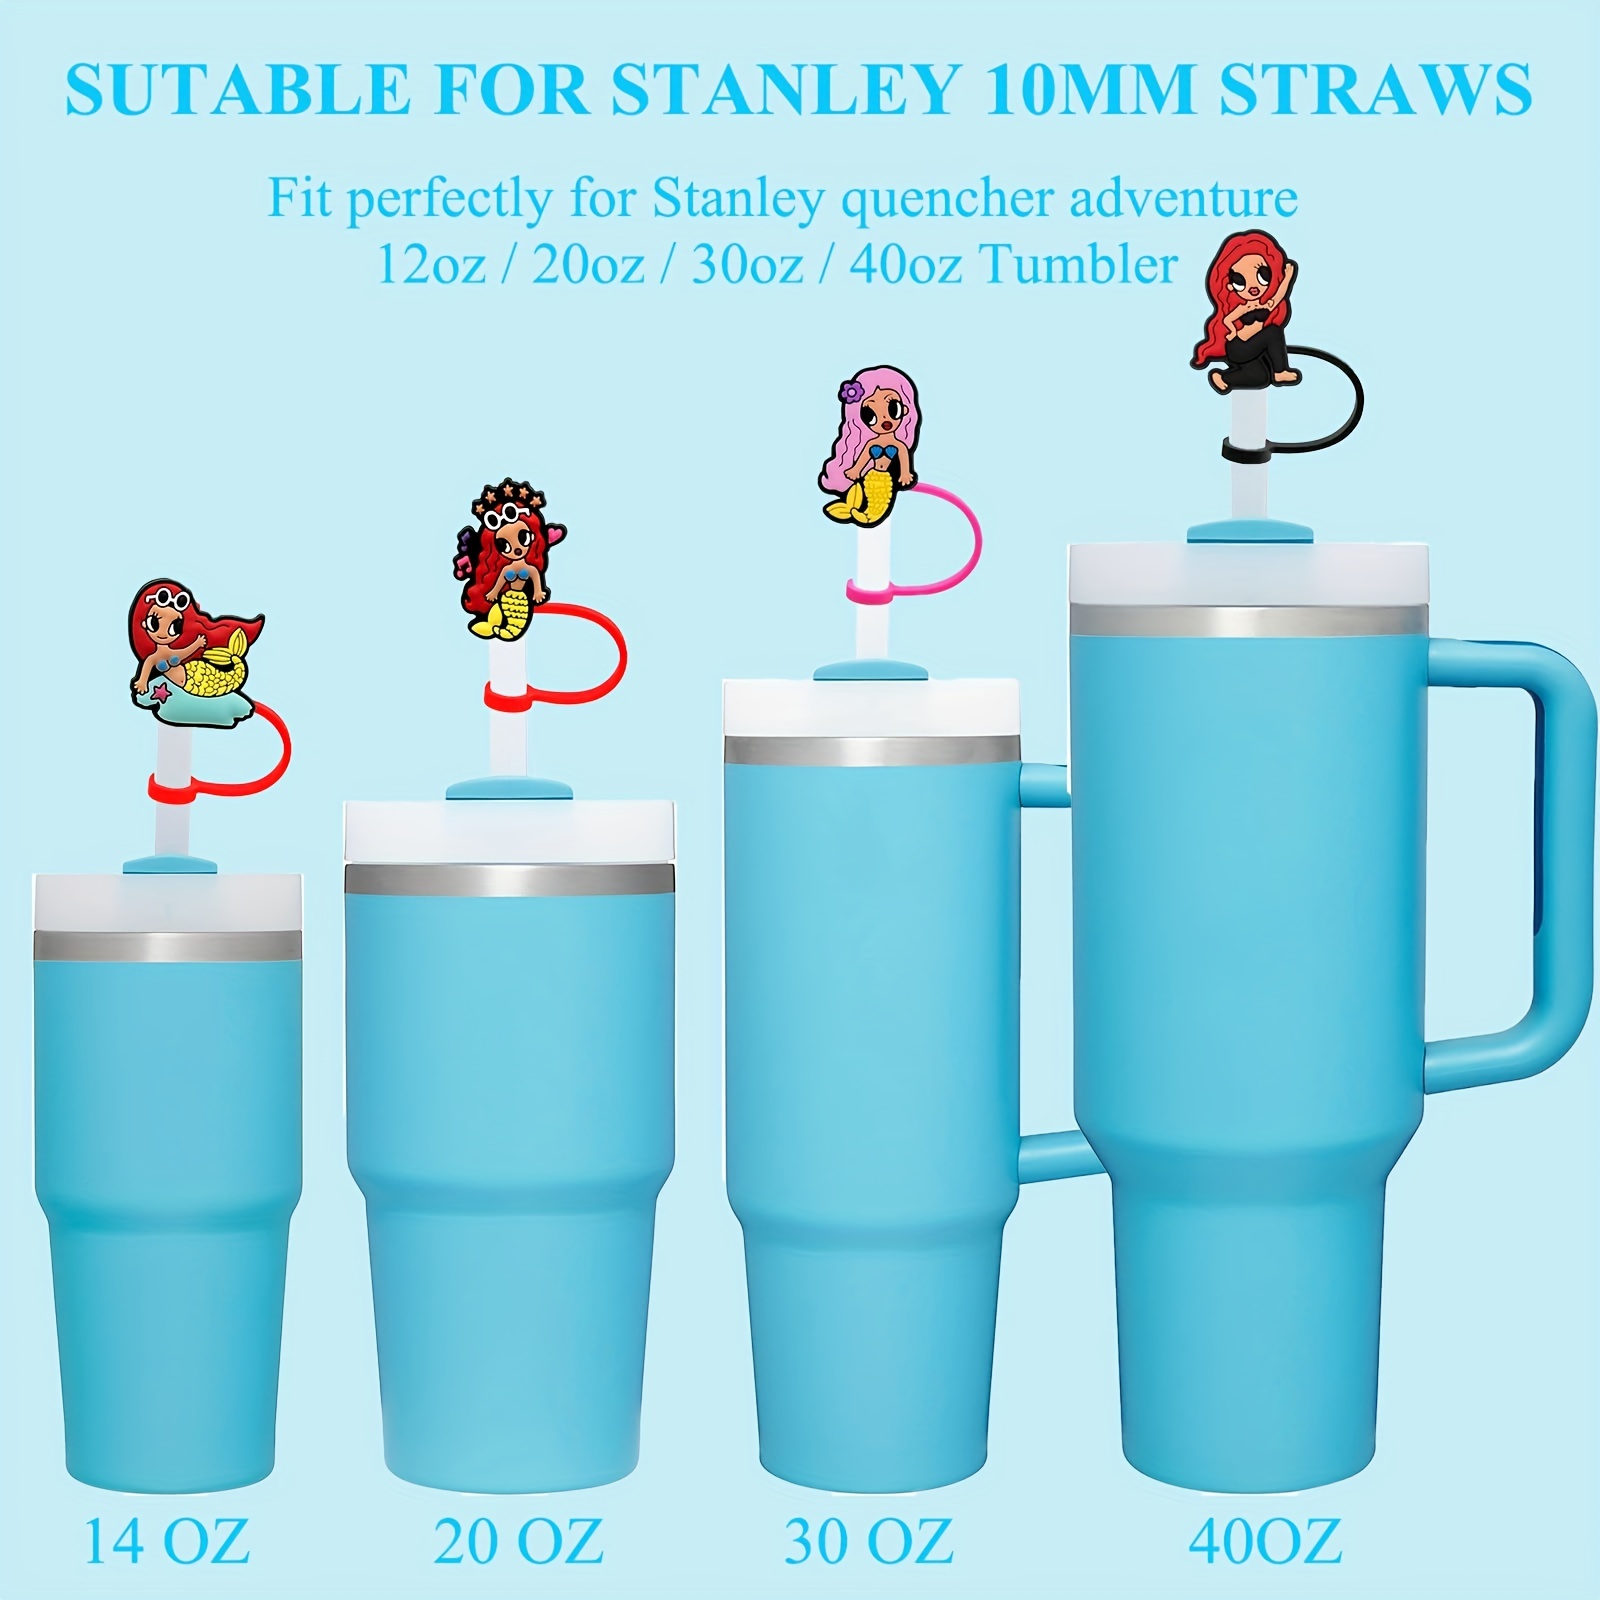 4pcs Straw Topper For Stanley Cup 30oz & 40oz Tumbler With Handle, Mermaid  Design Silicon Straw Cap For 10mm Straws, Reusable Drink Straw Tips Lids, D